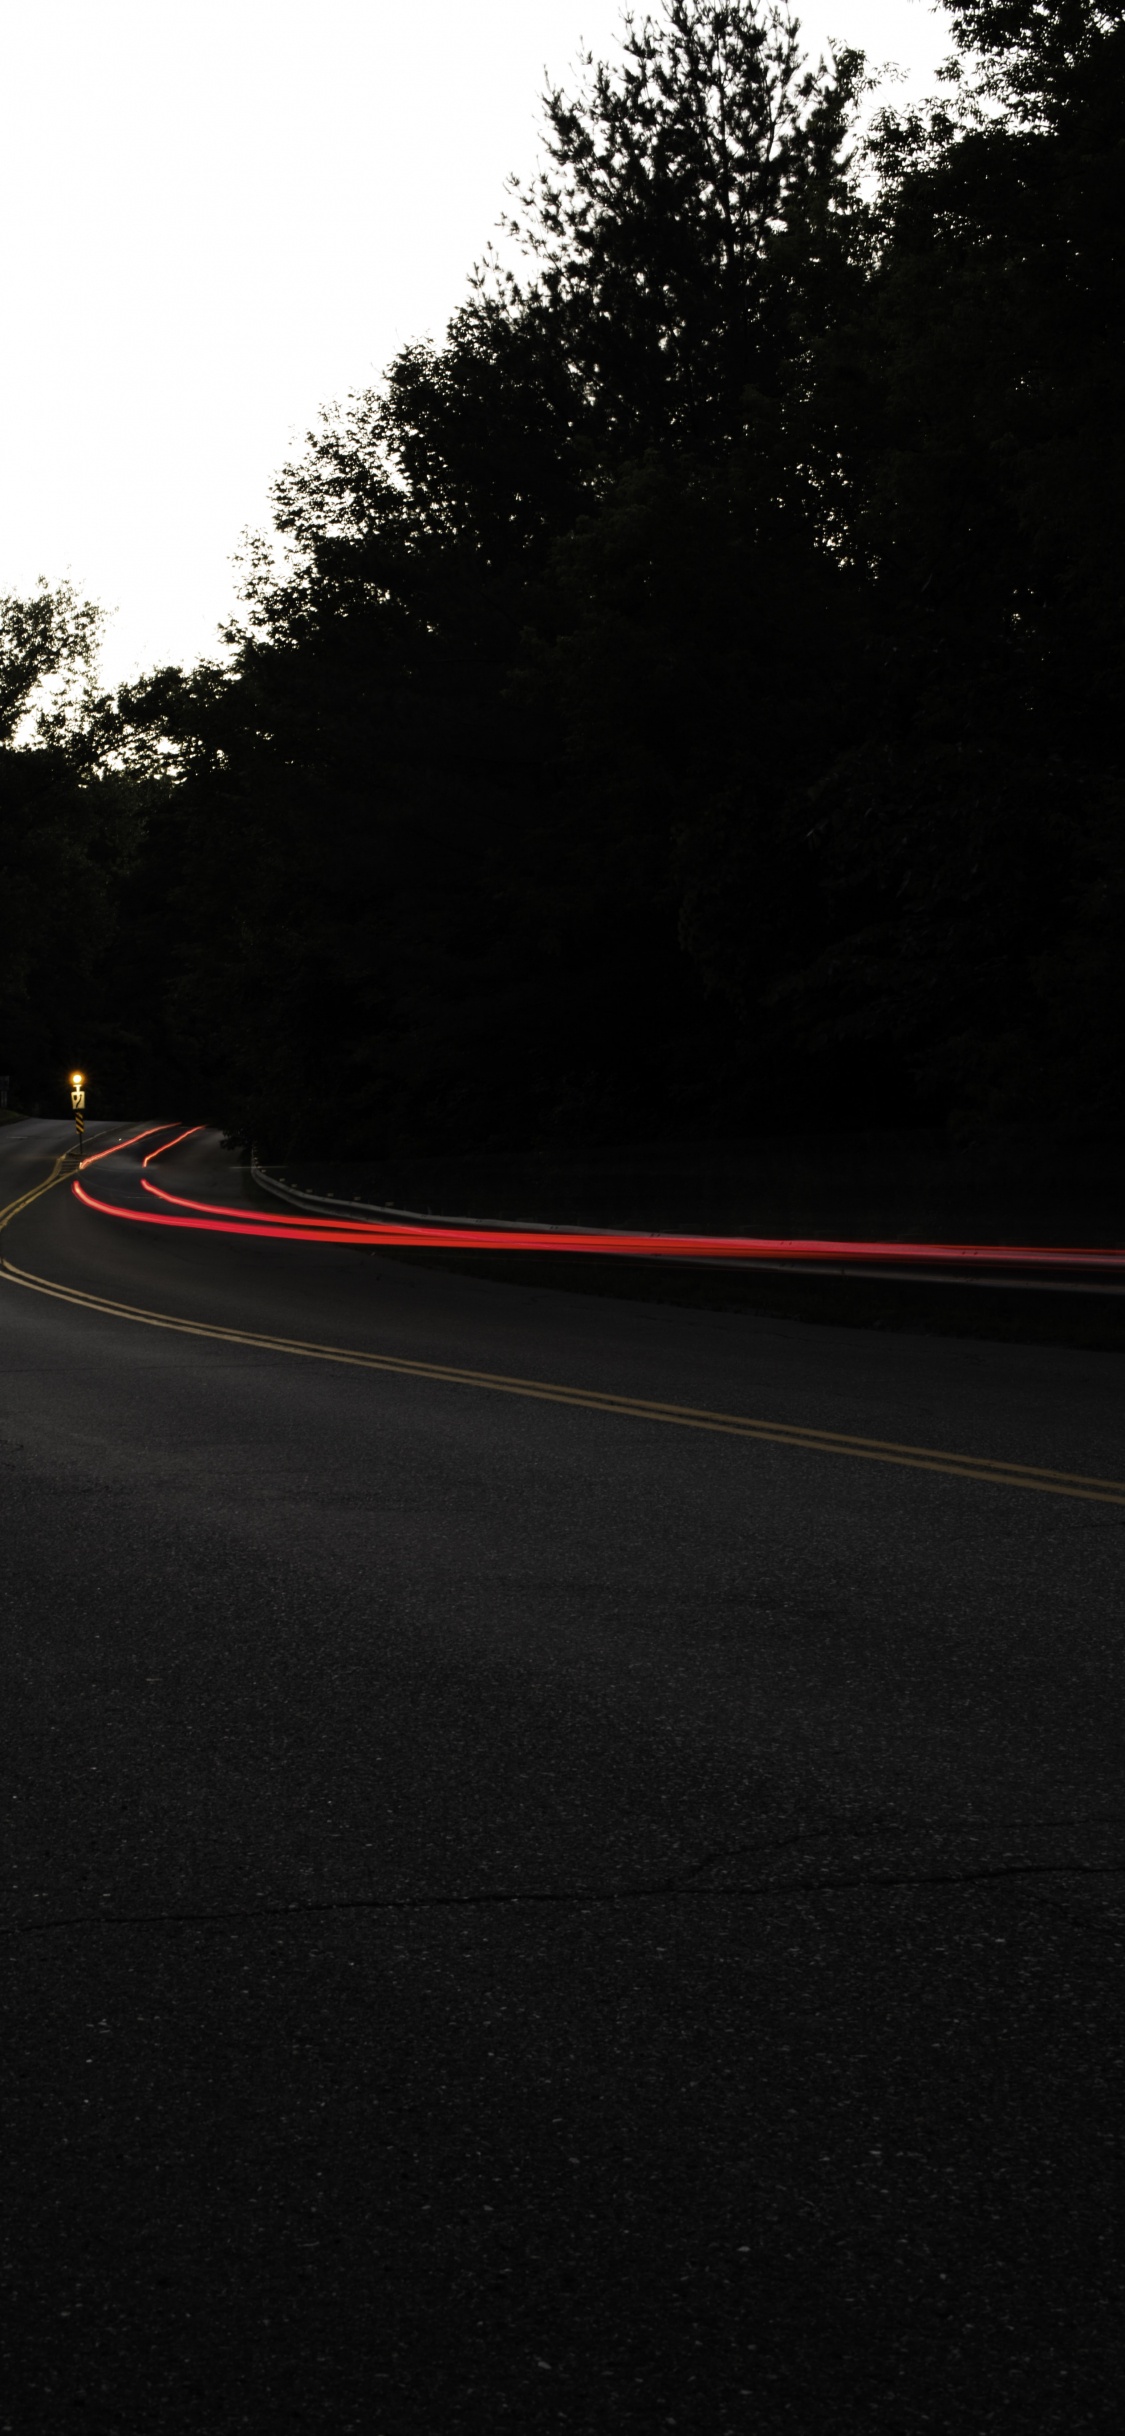 Time Lapse Photography of Road During Night Time. Wallpaper in 1125x2436 Resolution